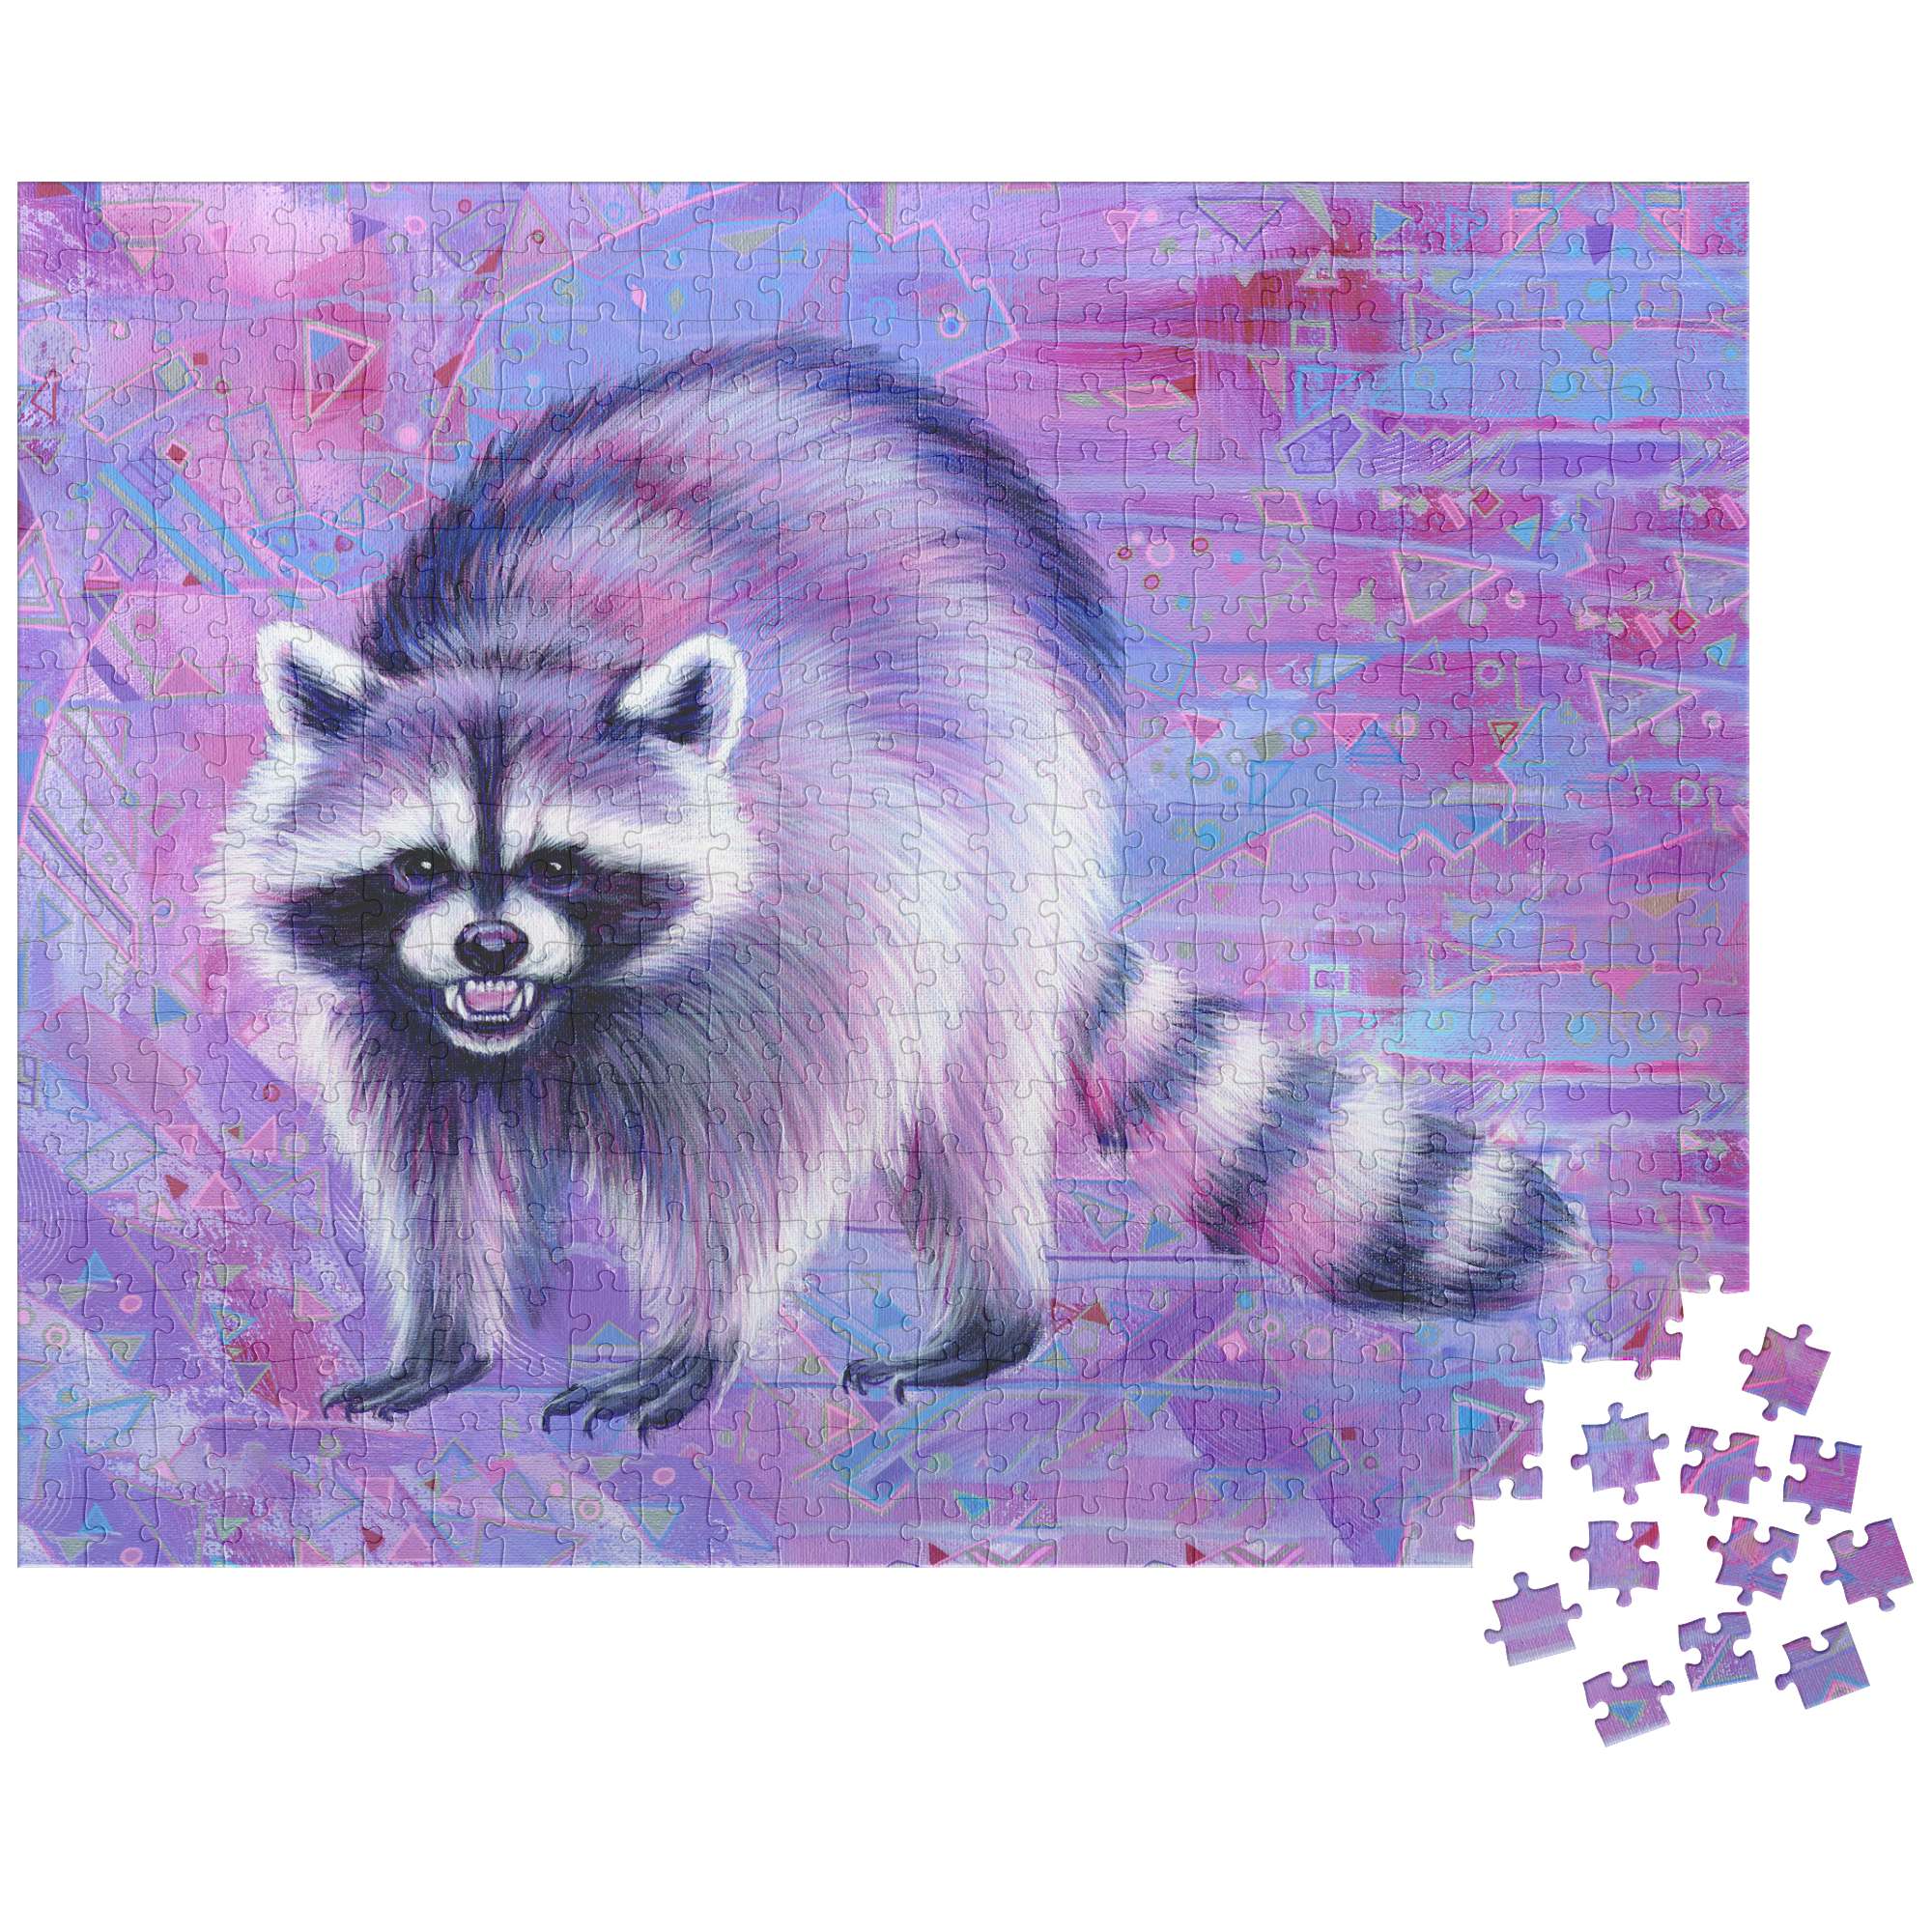 A nearly complete Raccoon Puzzle depicting a raccoon on a purple geometric background, with a few pieces still detached to the side.